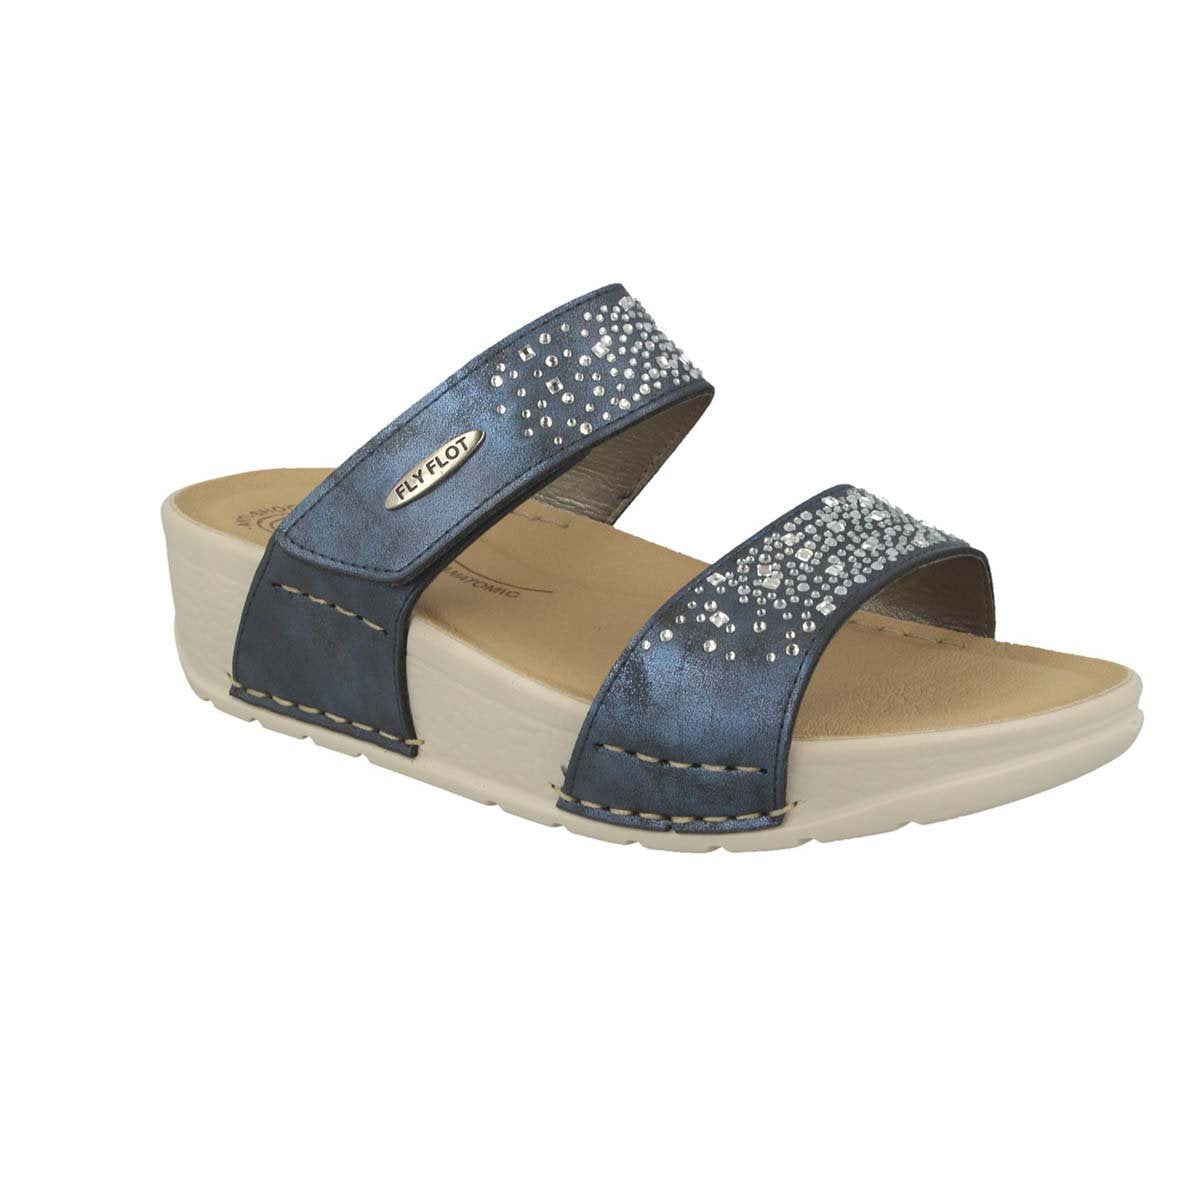 See the Strap With Velcro Embellished Slide Women Sandals With Soft Microfiber Upper And Faux Leather Insole in the colour BLACK, available in various sizes